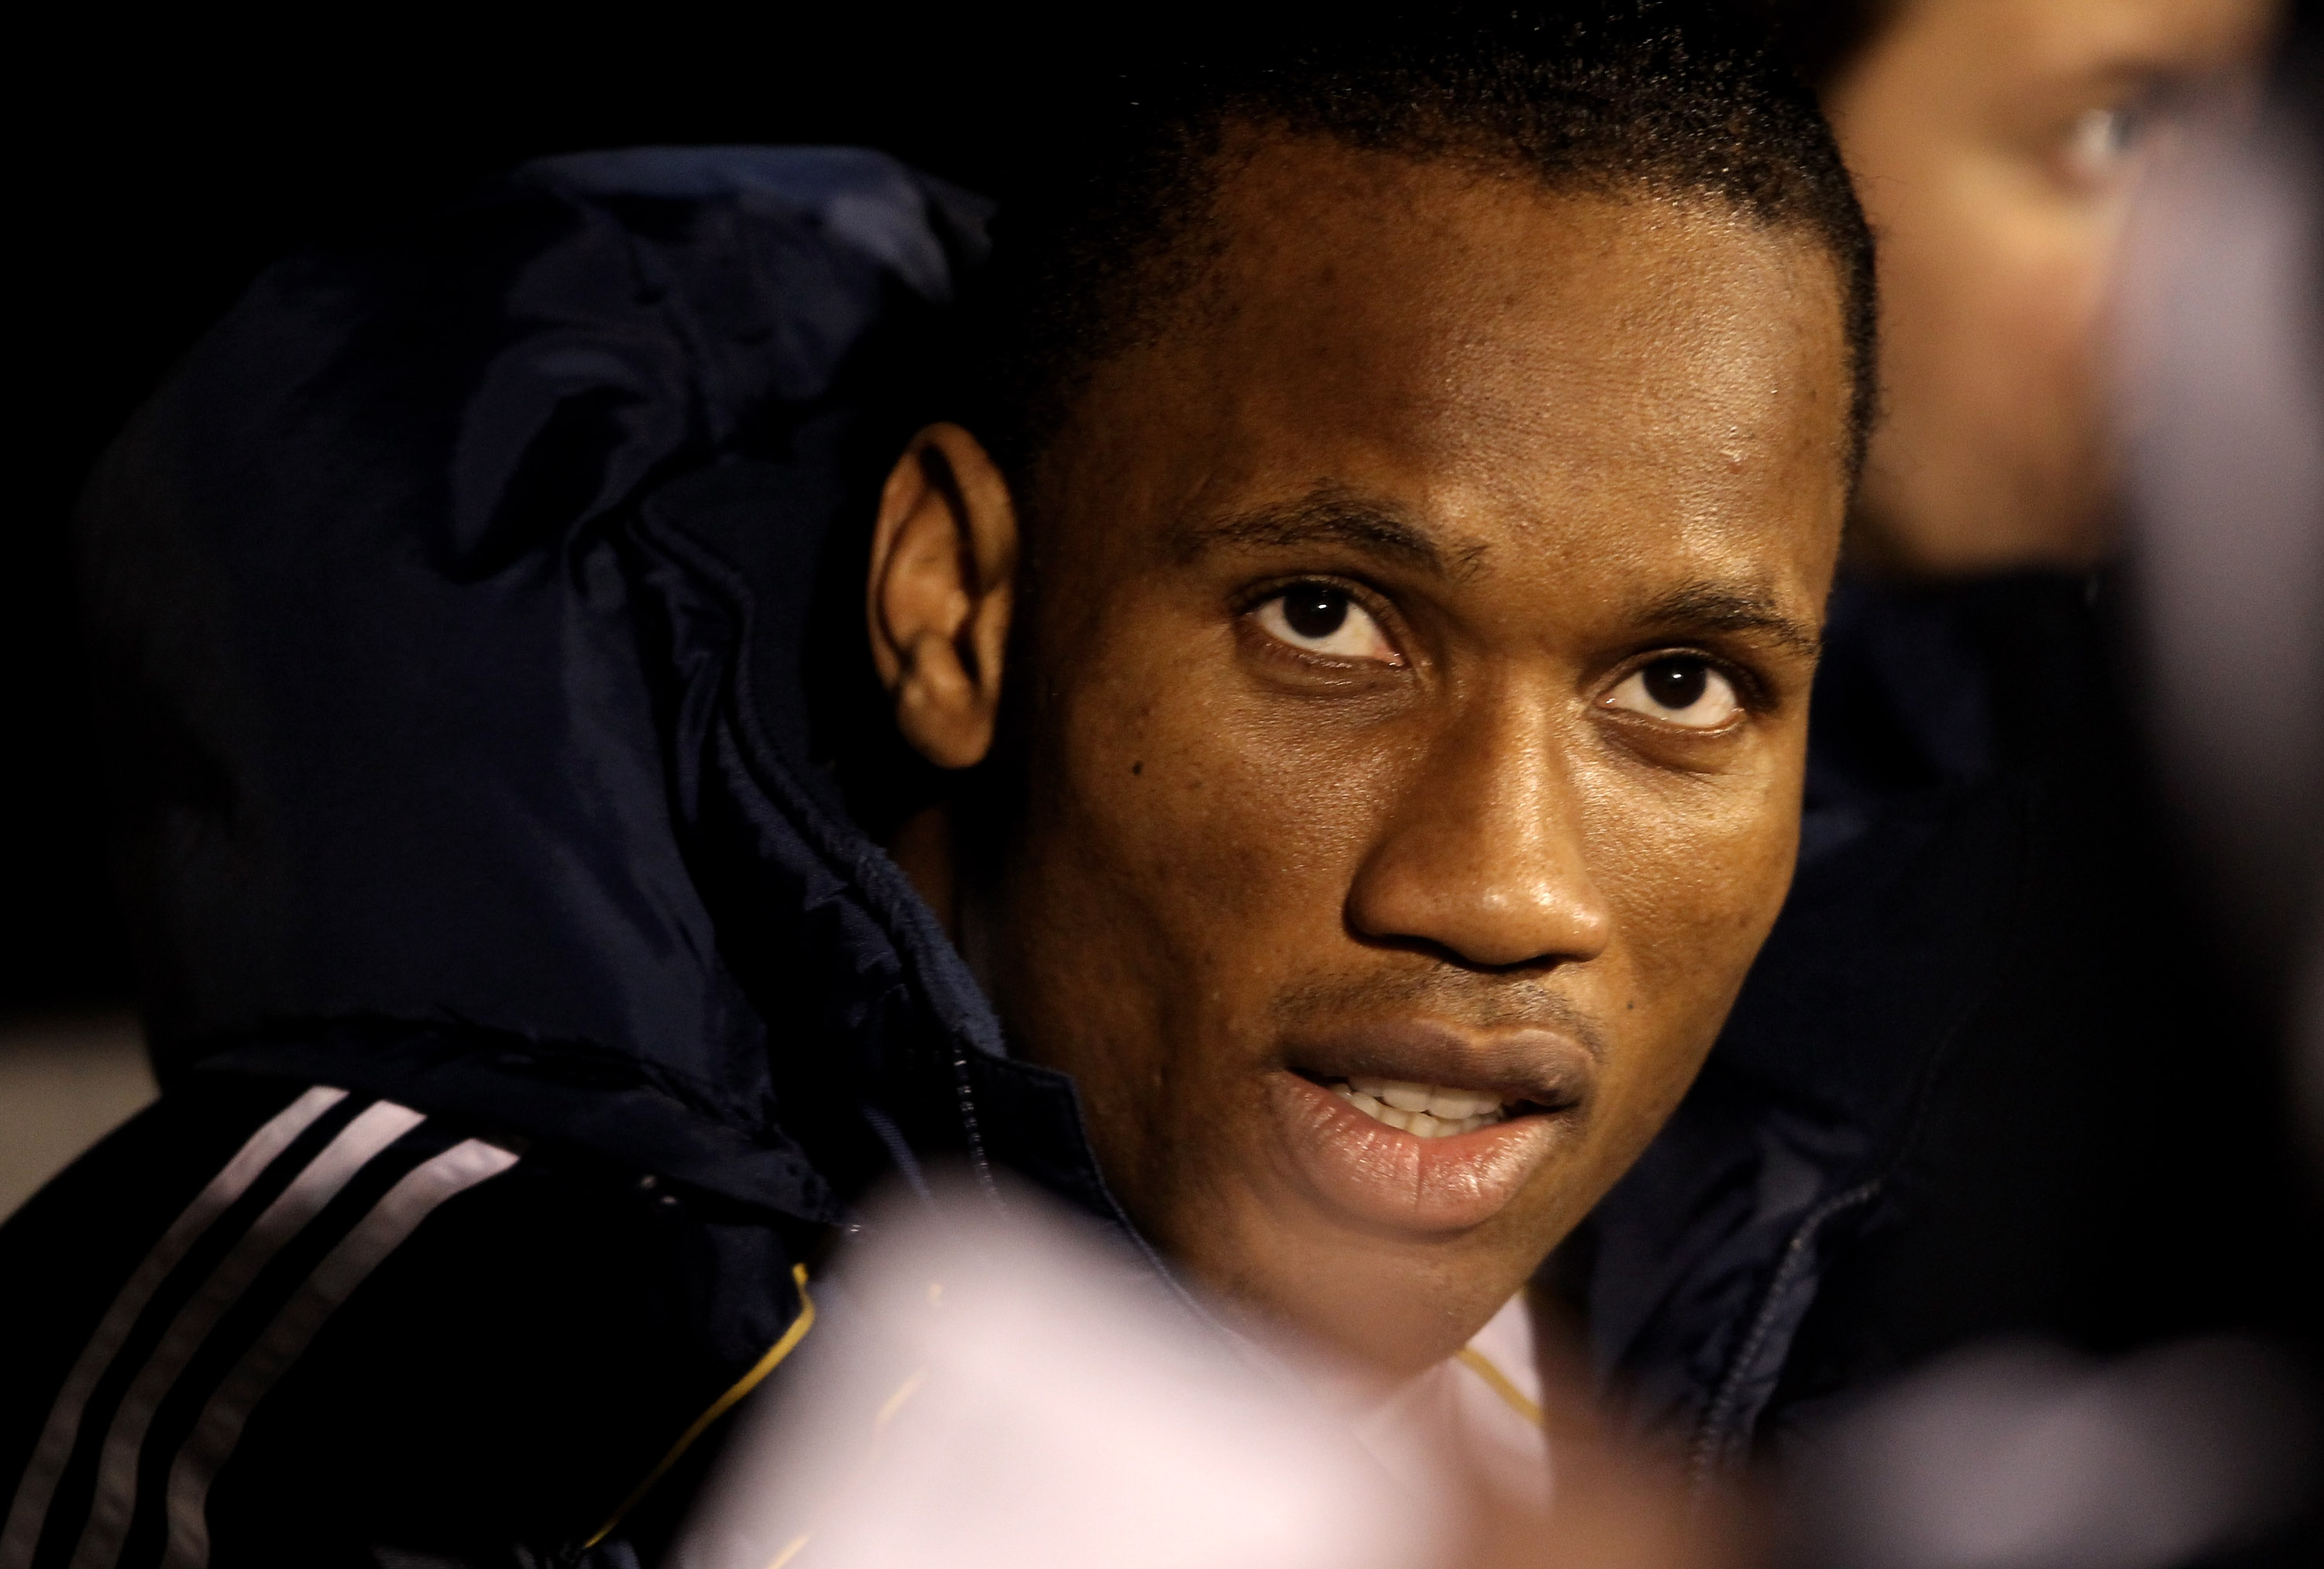 LONDON, ENGLAND - FEBRUARY 14:  Didier Drogba of Chelsea sits on the bench during the Barclays Premier League match between Fulham and Chelsea at Craven Cottage on February 14, 2011 in London, England.  (Photo by Scott Heavey/Getty Images)